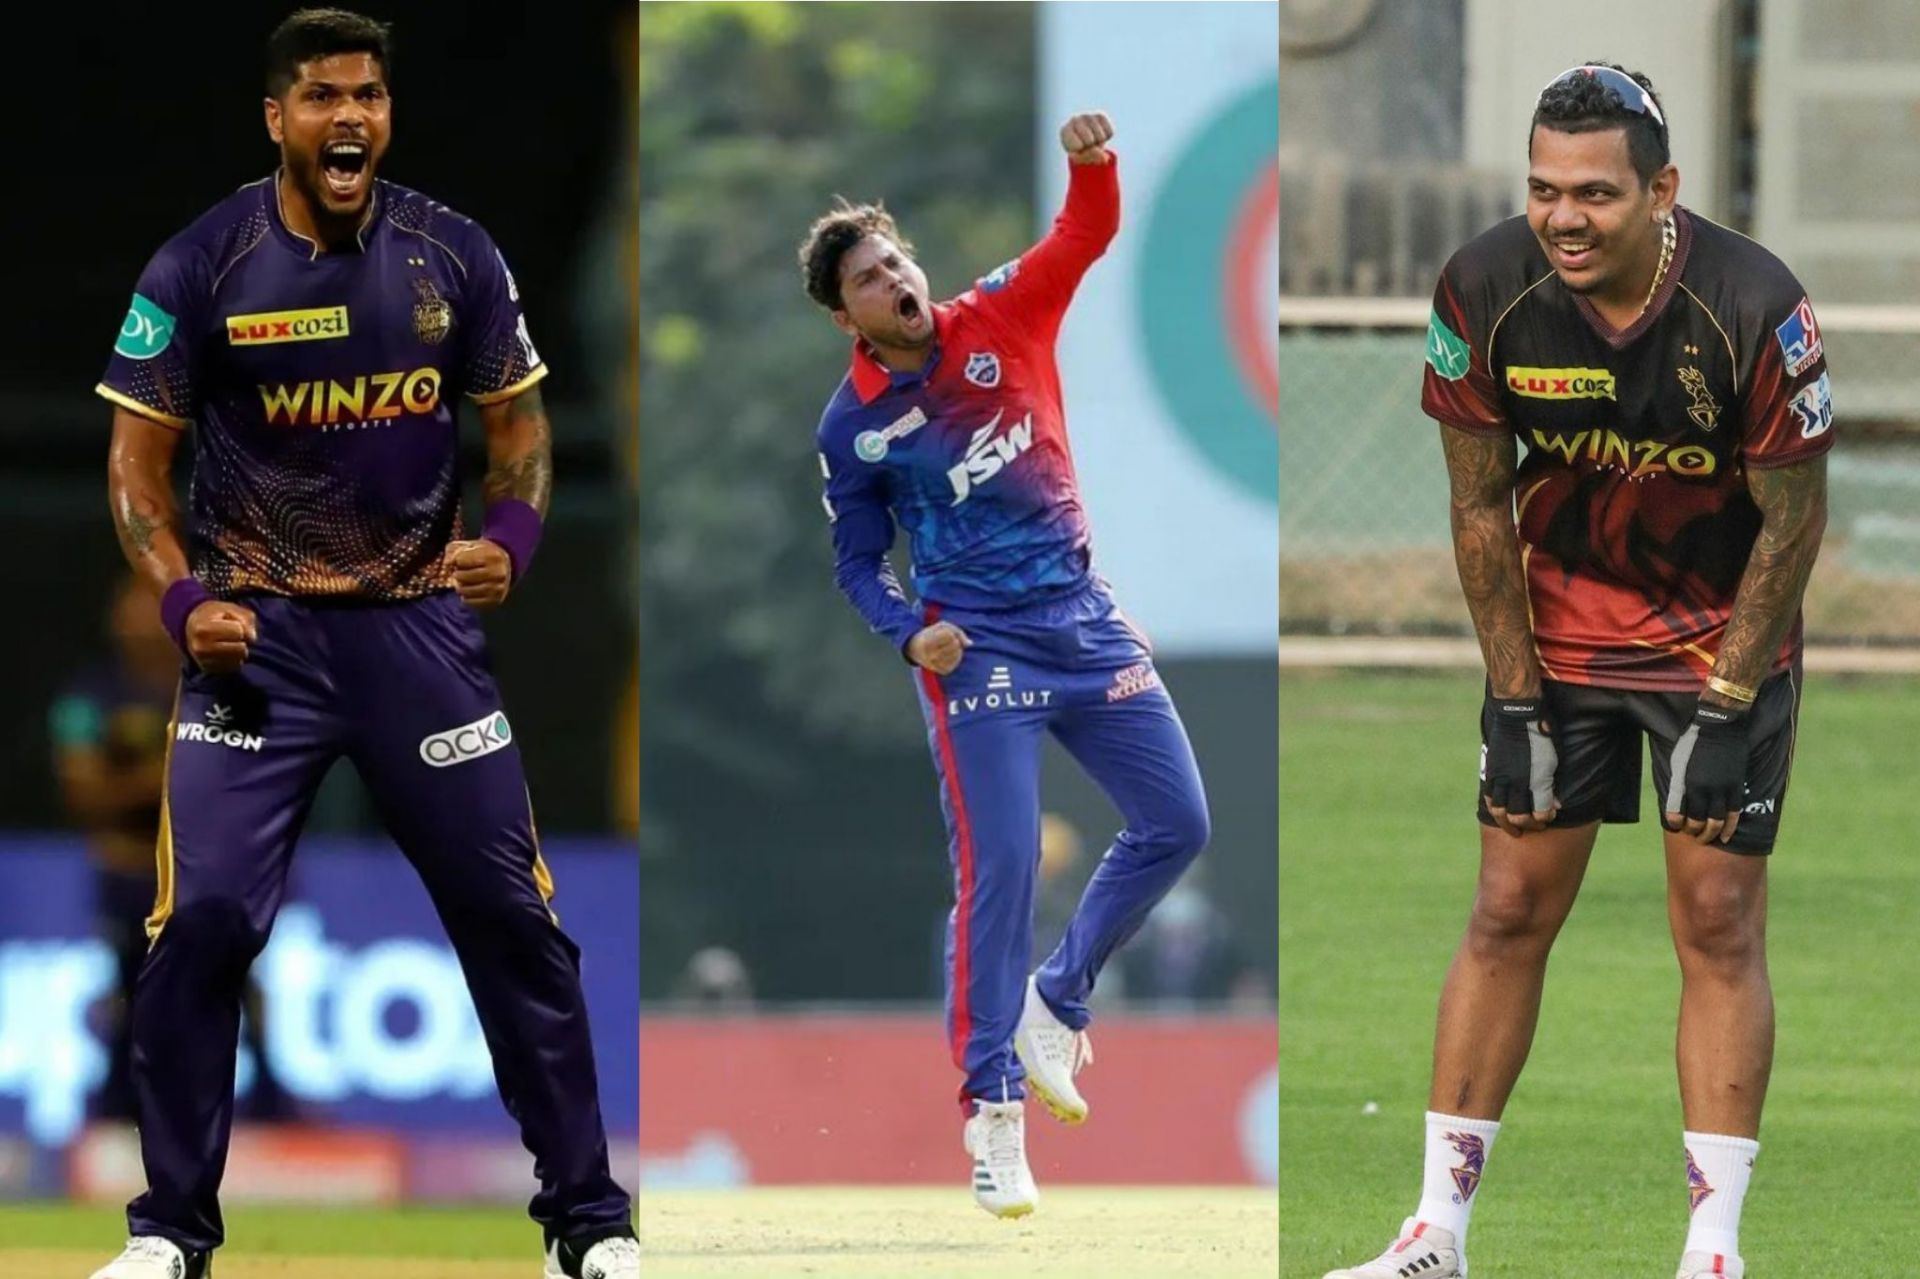 Match 19 of the IPL 2022 will be played between Kolkata Knight Riders and Delhi Capitals